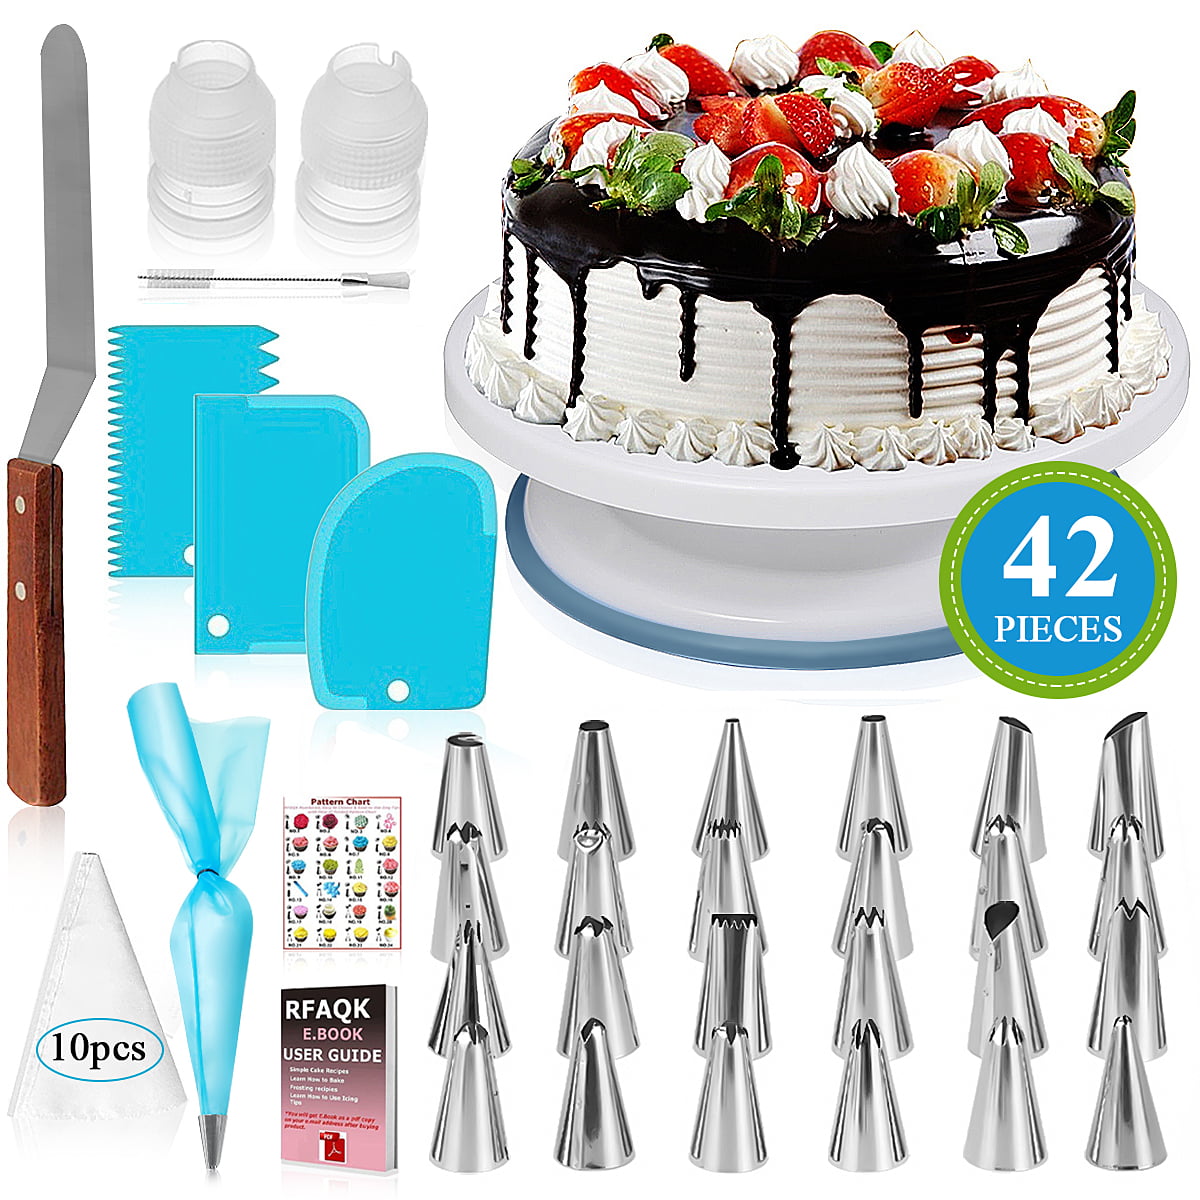 70 Turntable-Rotating Cake stand-24 Numbered Easy to use Icing Tips with Pattern Chart and E.Book-Straight and Angled Spatula-3 Cake Scrapers 70 Pcs Cake Decorating Equipment